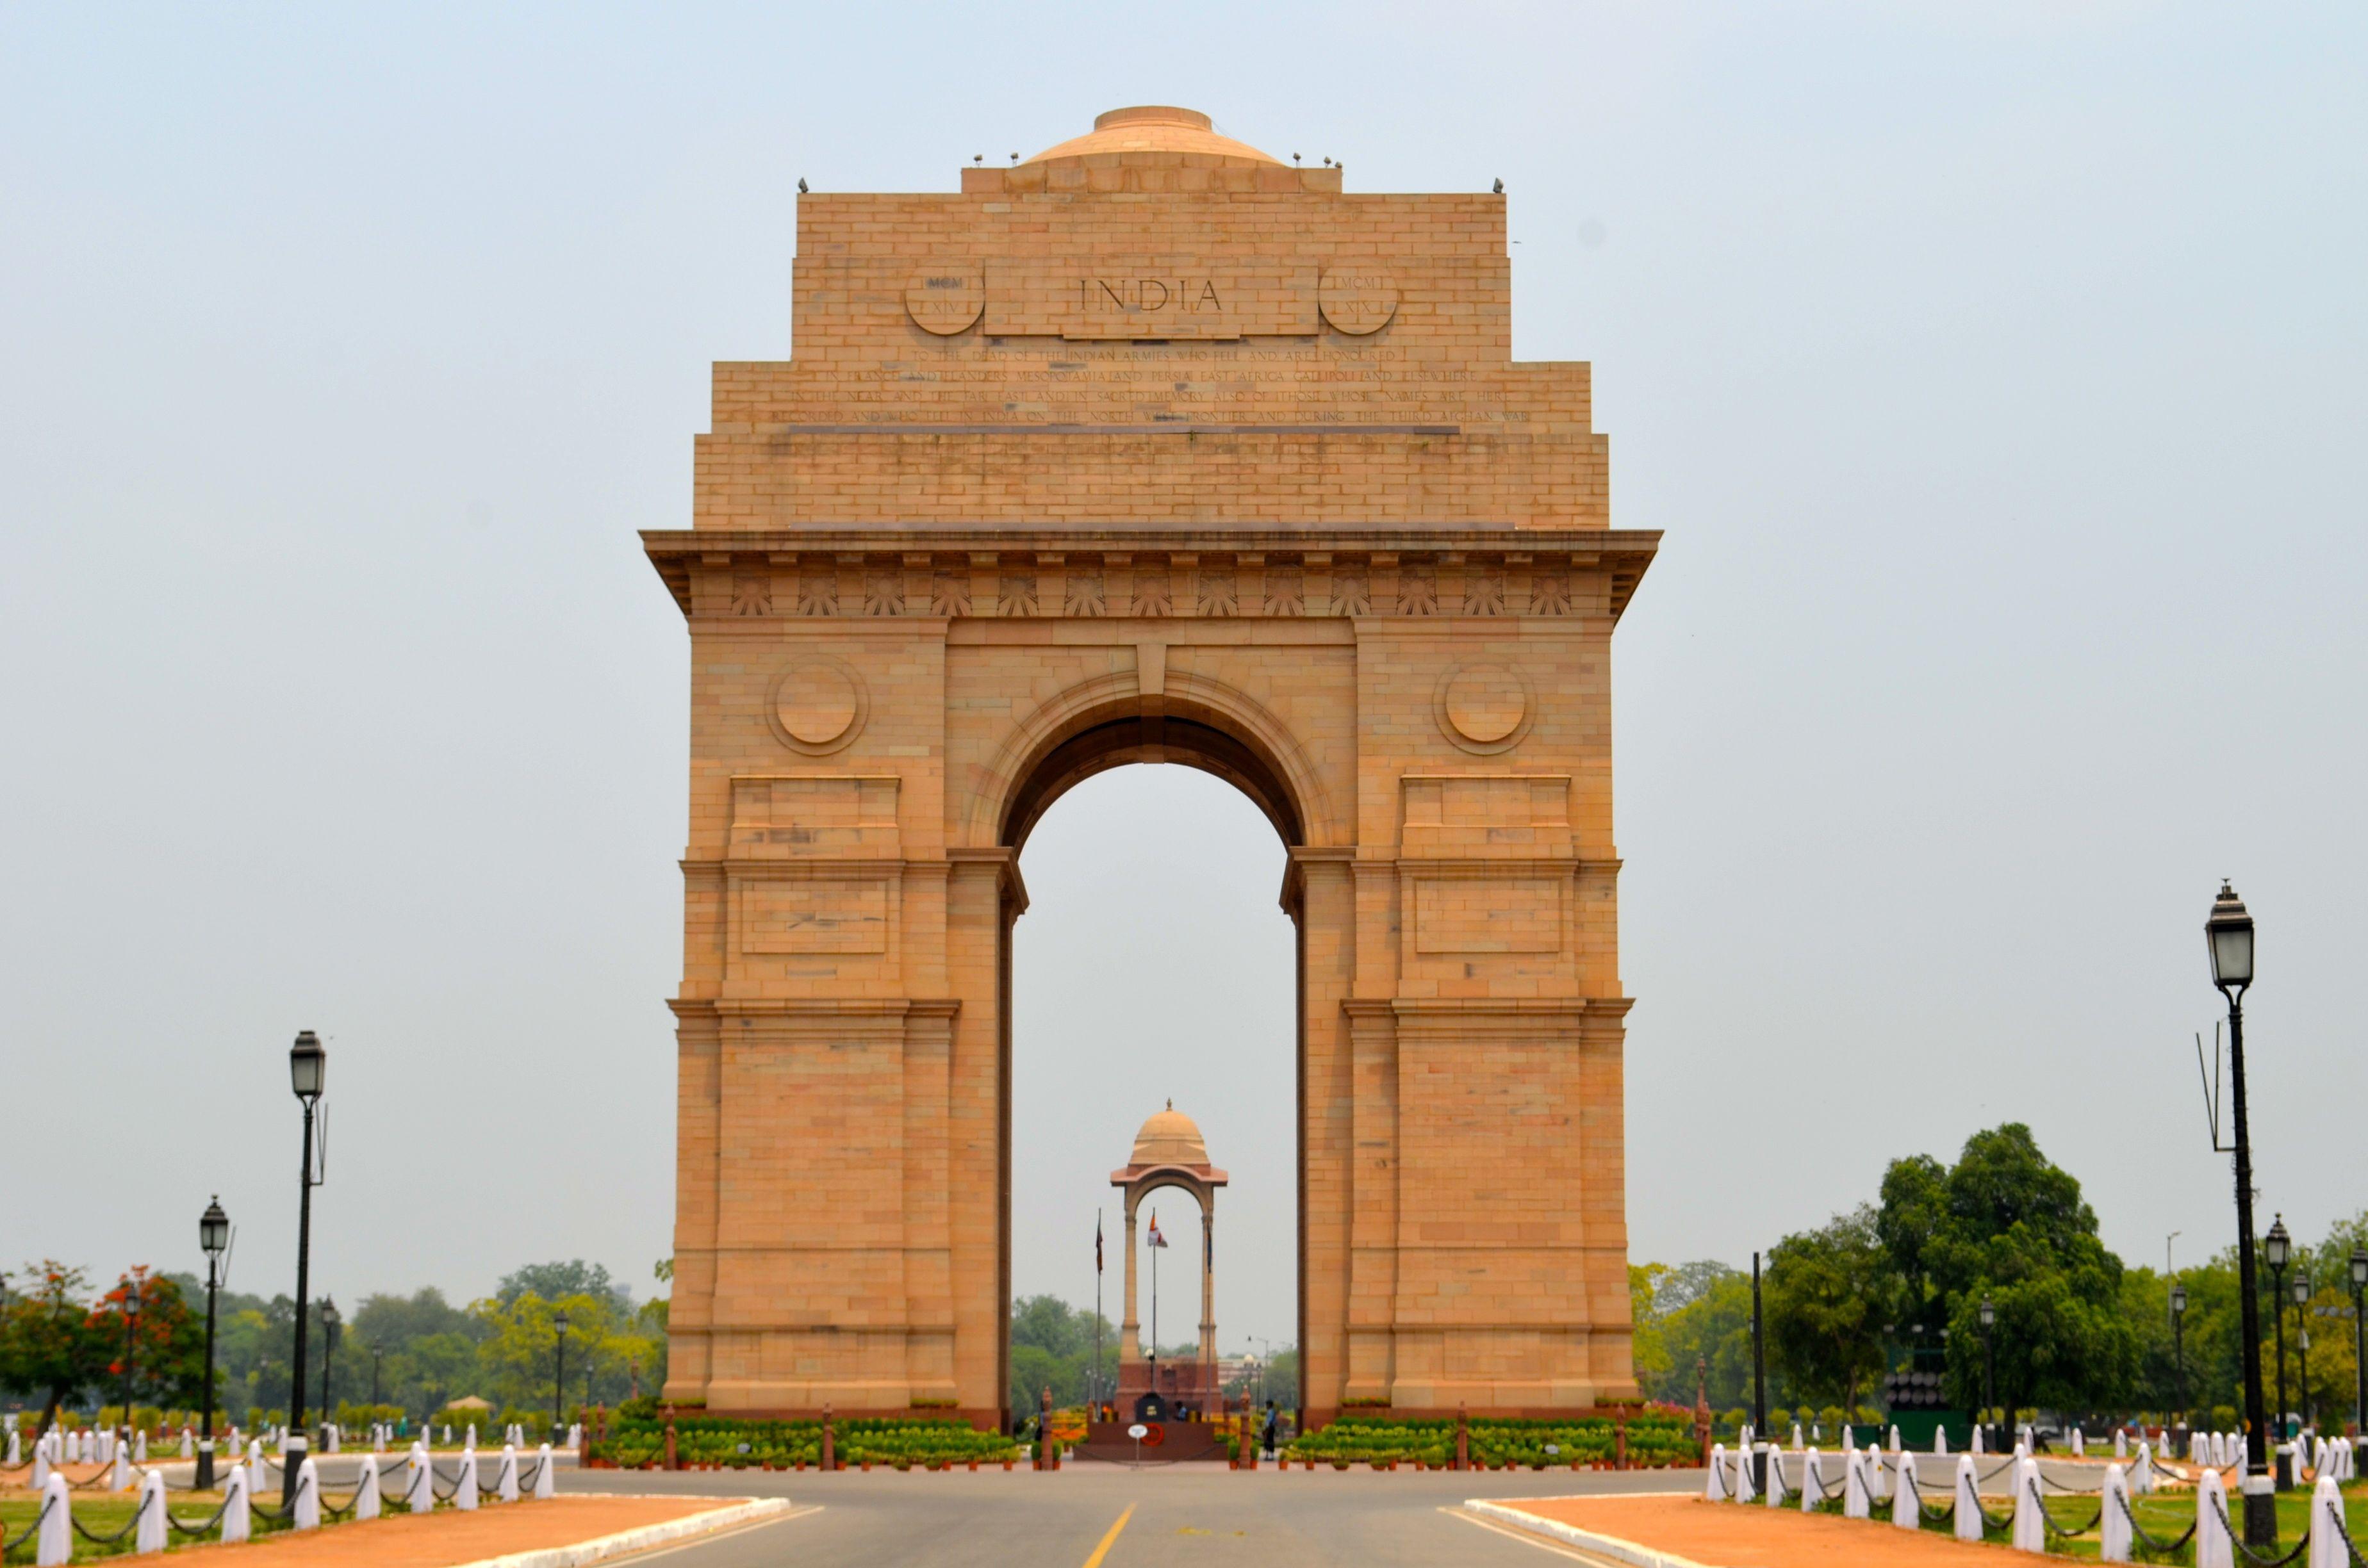 tourist attractions near india gate